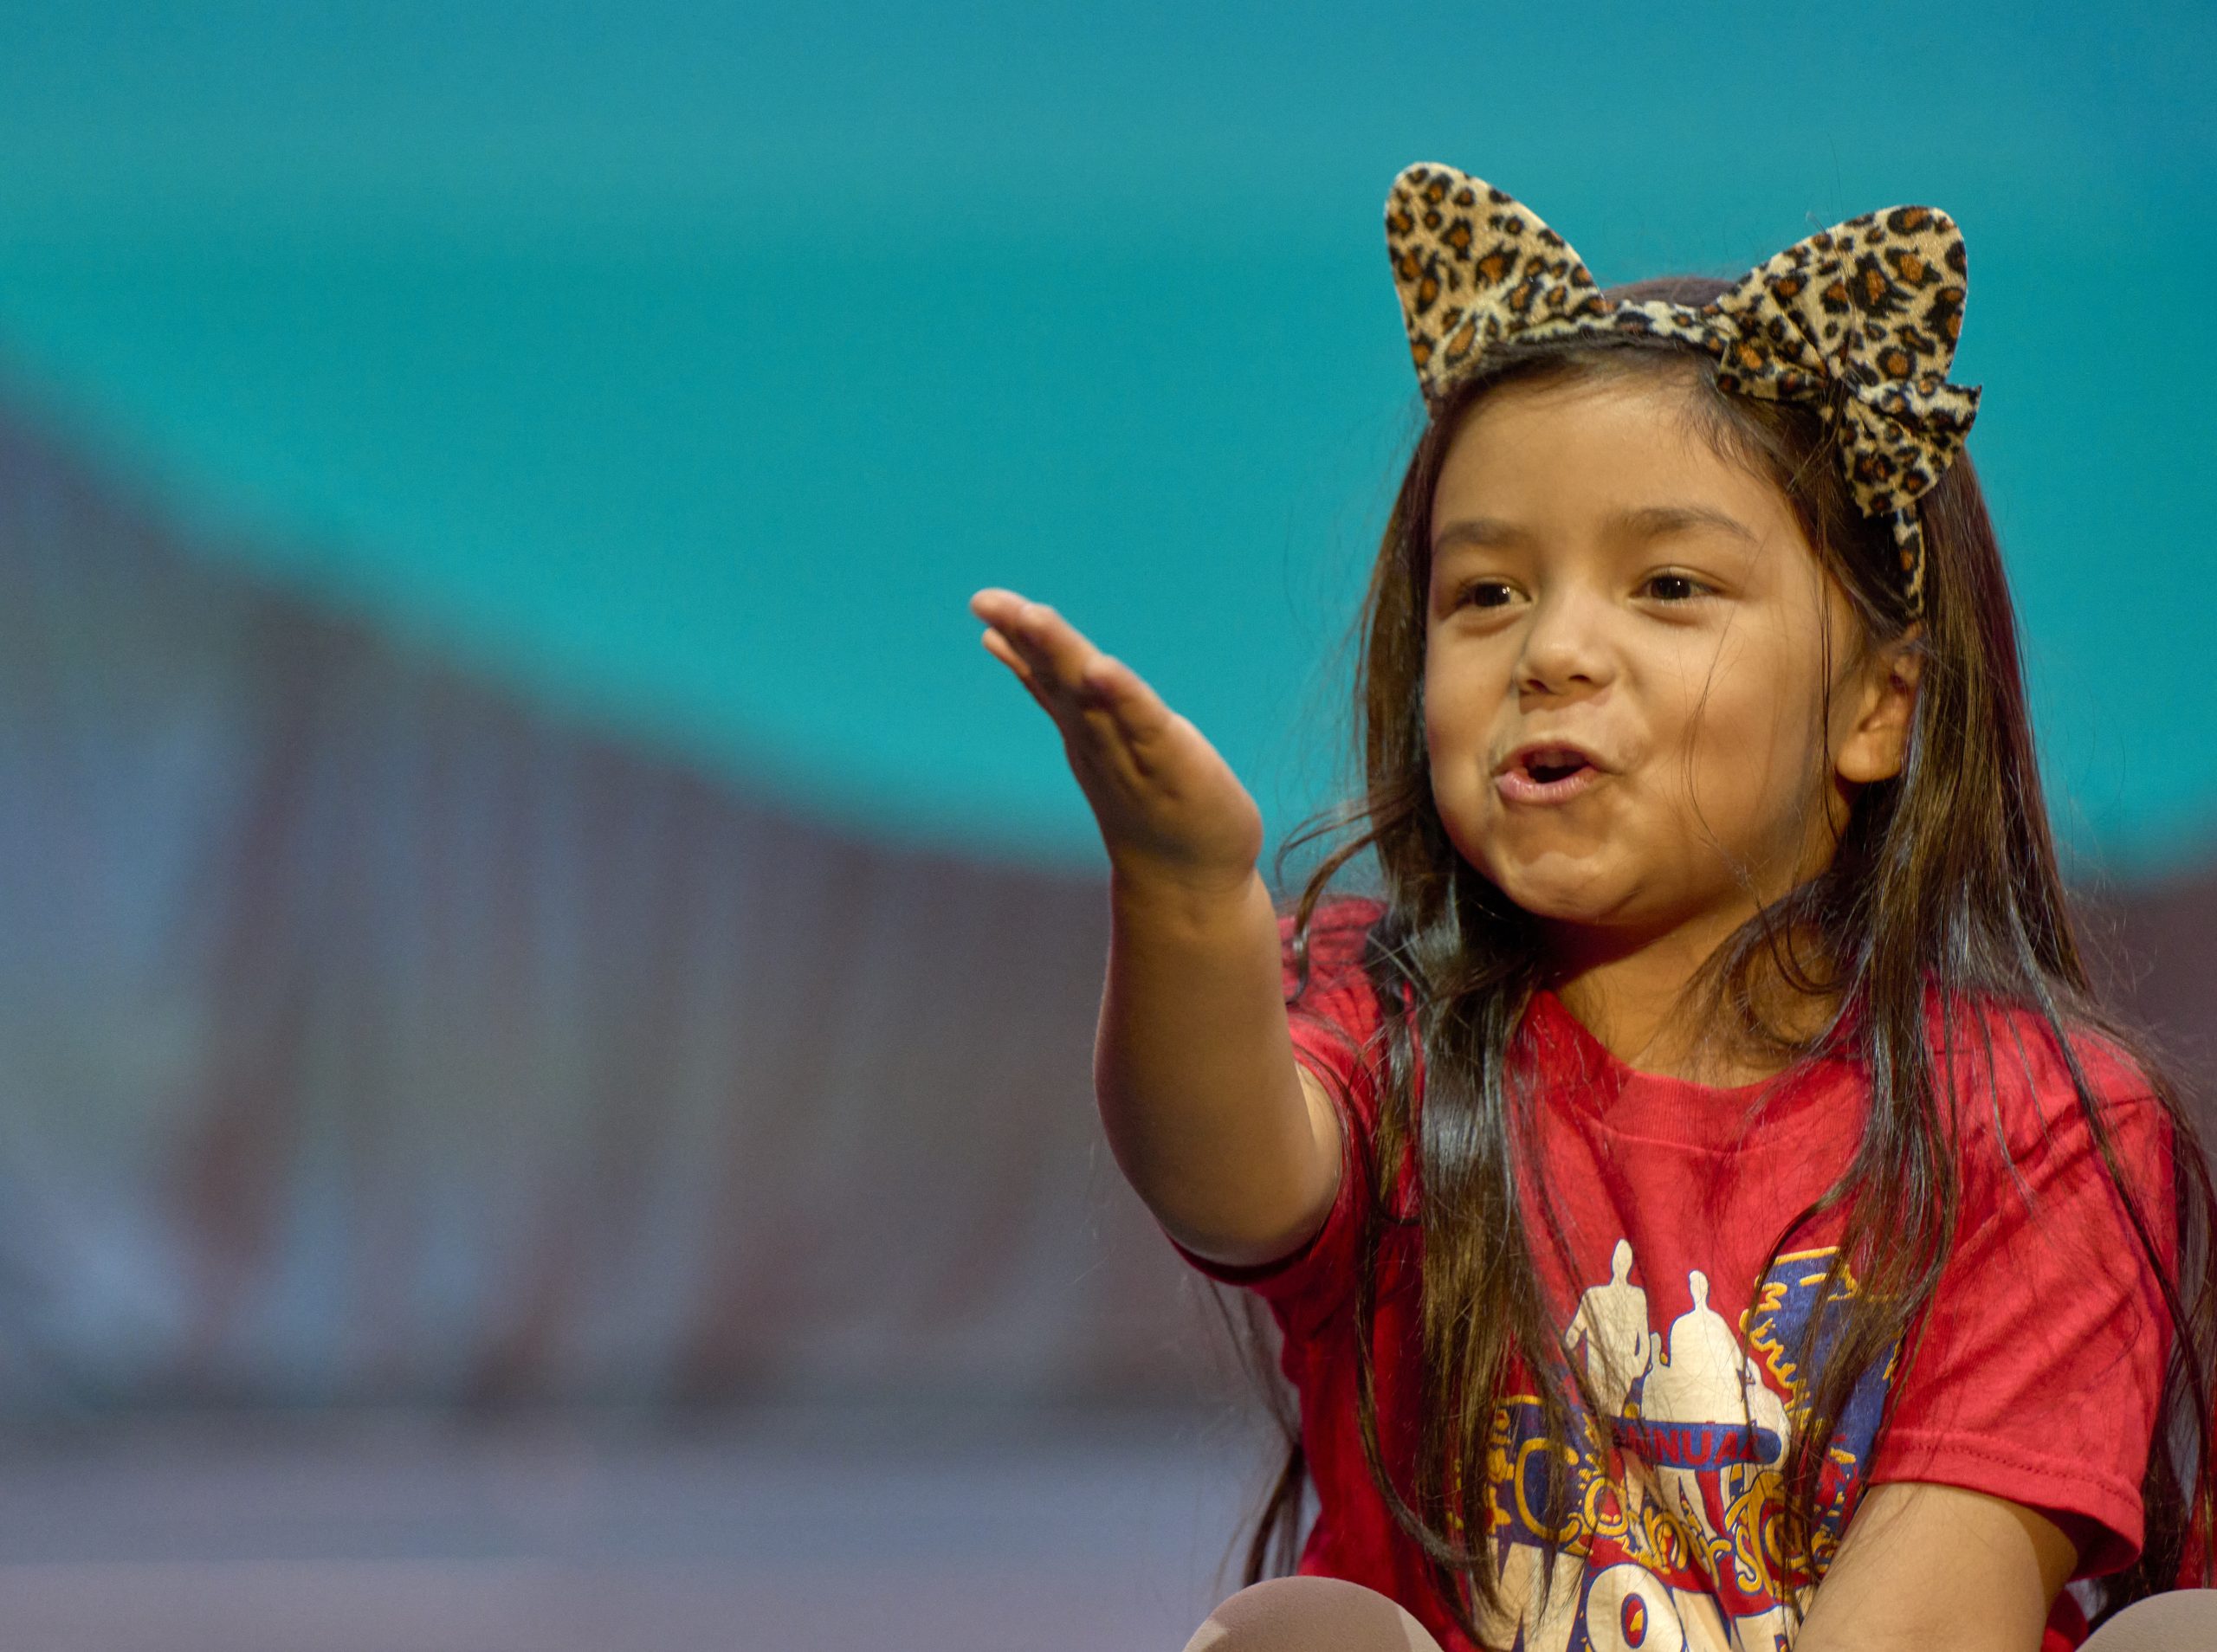 A young girl in a red shirt and cat ear headband blows a kiss from a stage